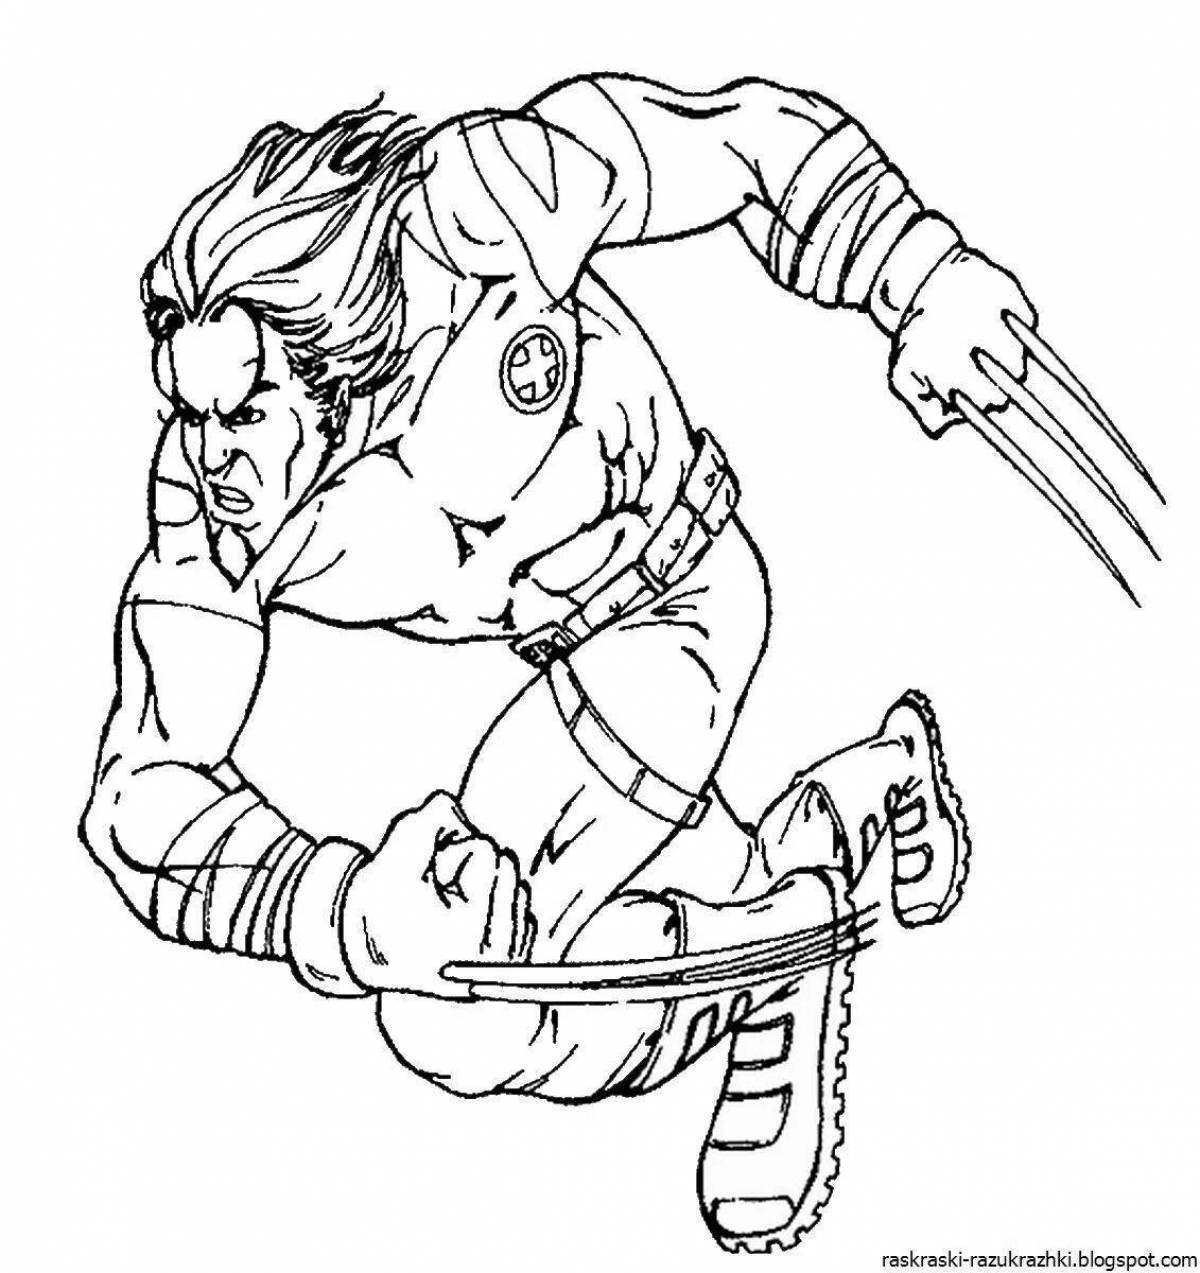 Amazing marvel coloring page for boys